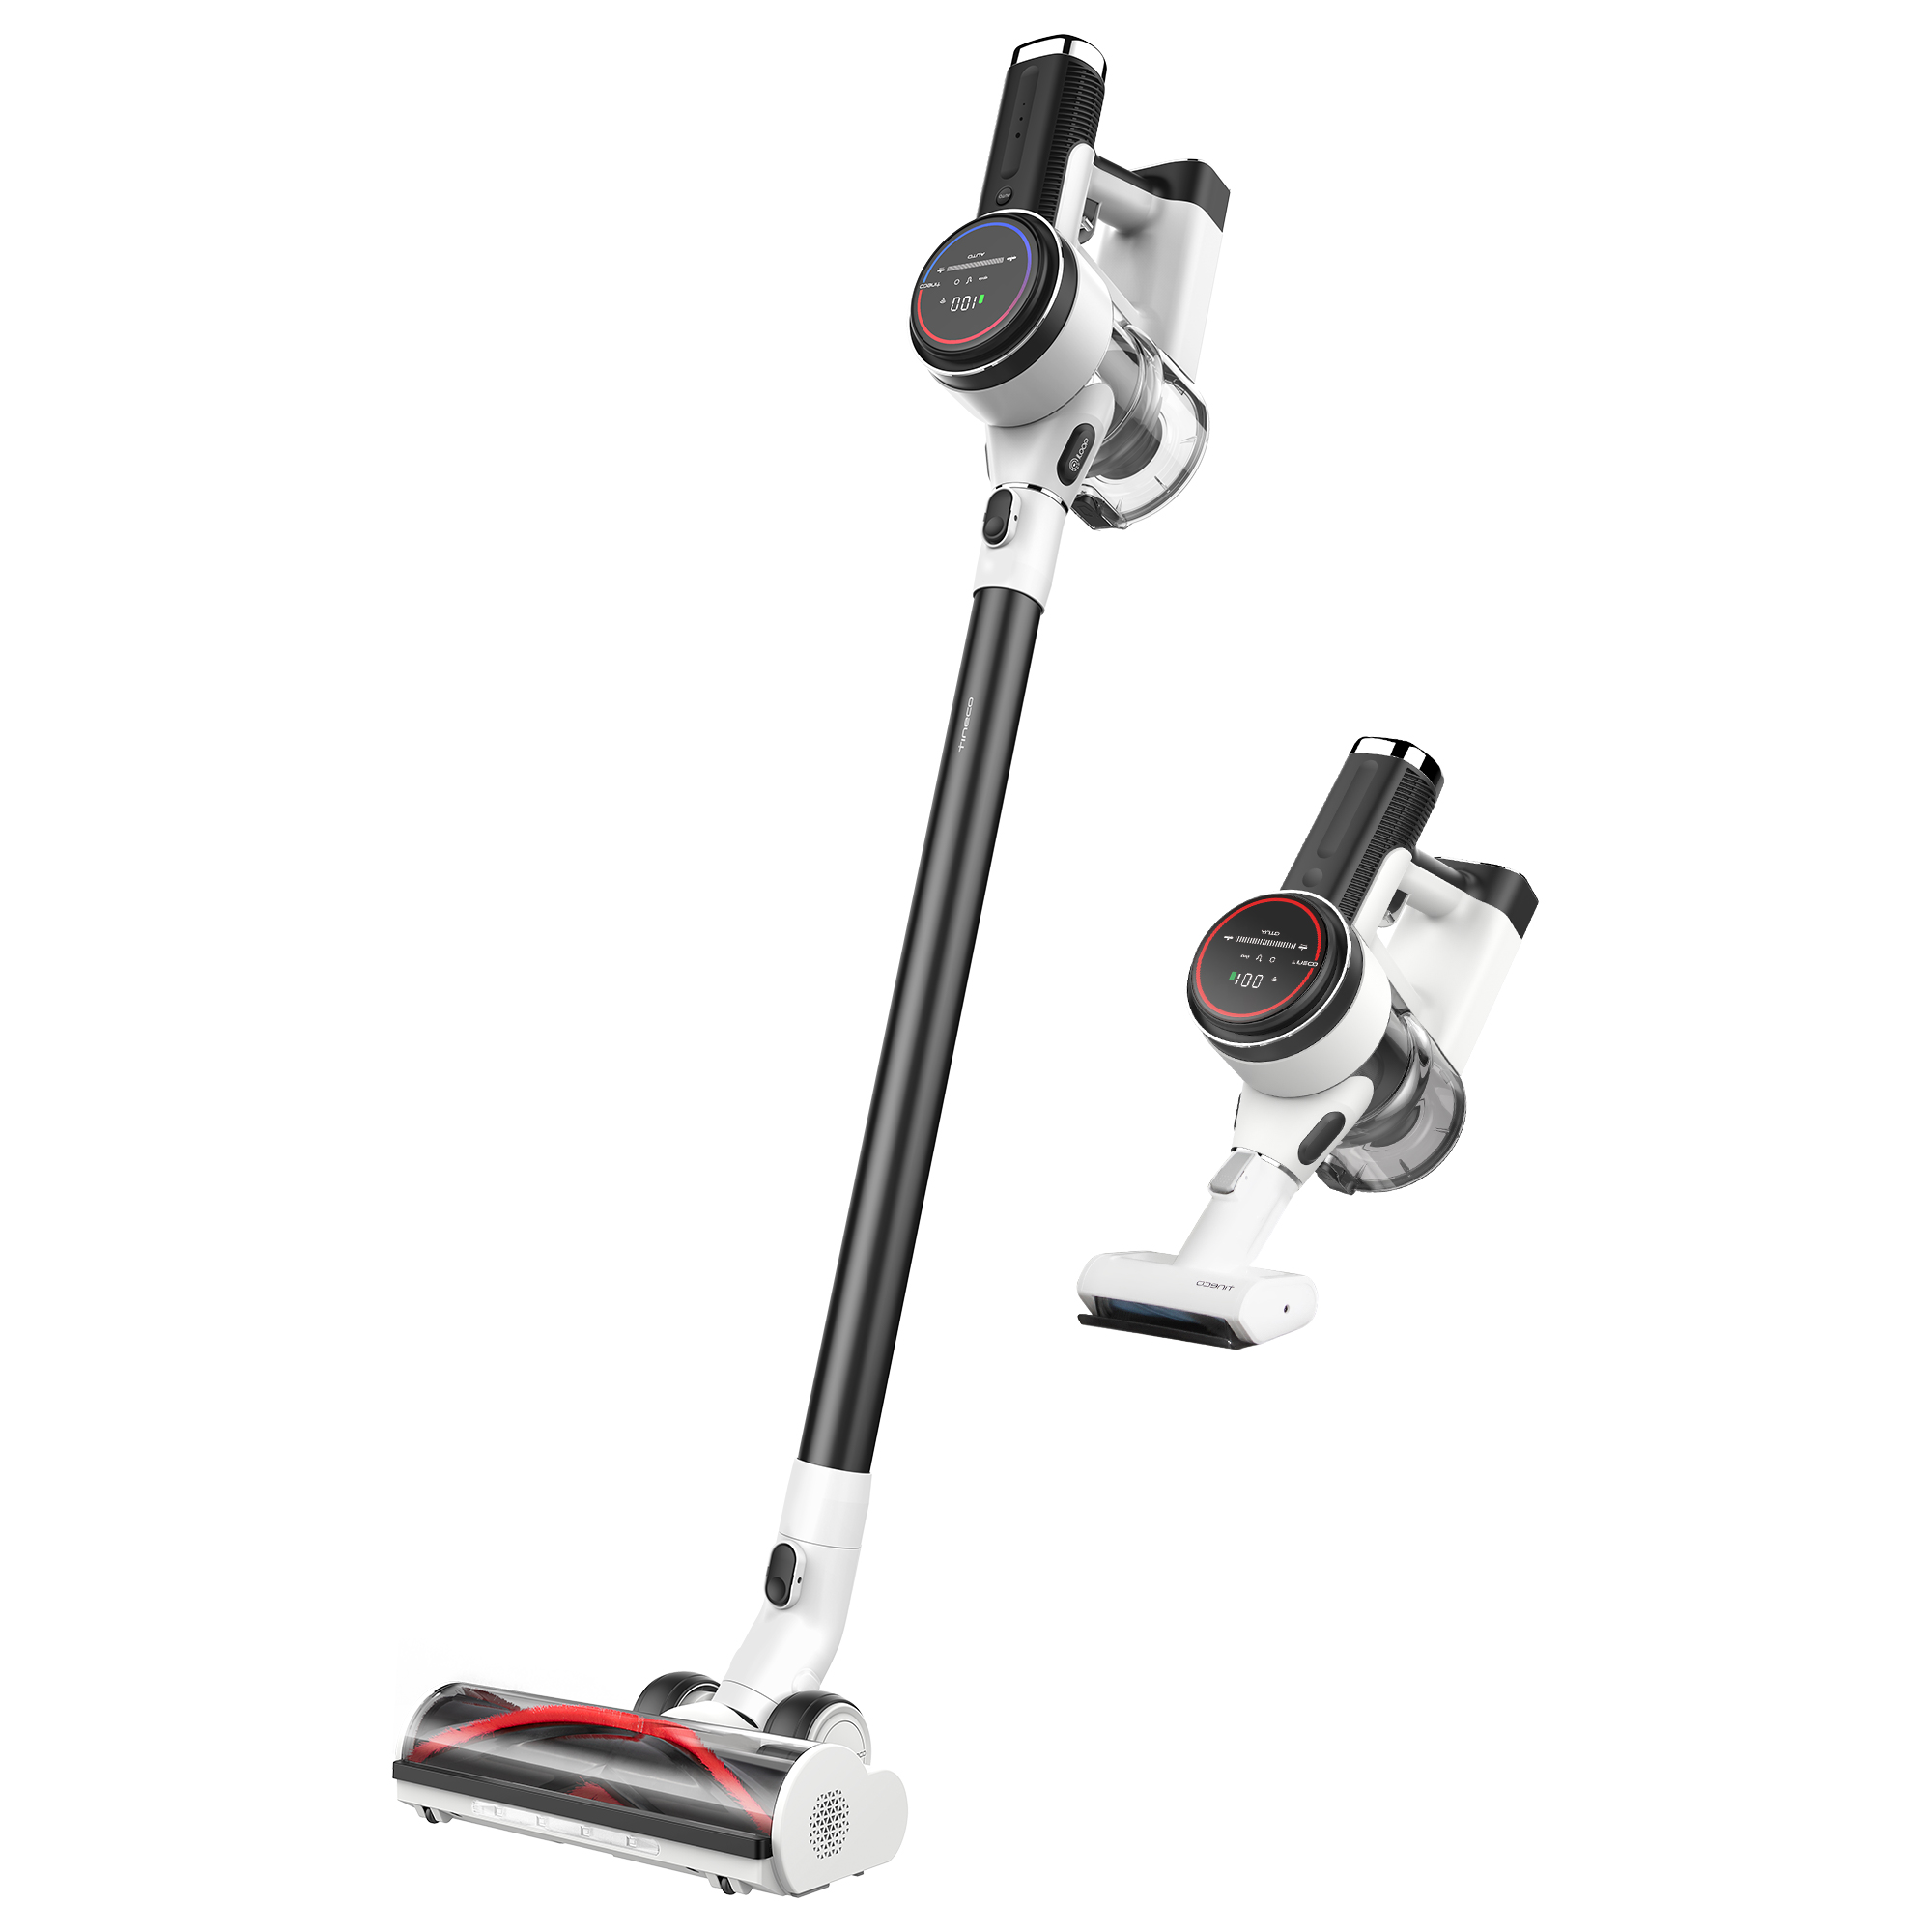 Tineco Pure One S12 EX Smart Cordless Stick Vacuum Cleaner with Two Batteries up to 100 minutes runtime - image 1 of 7